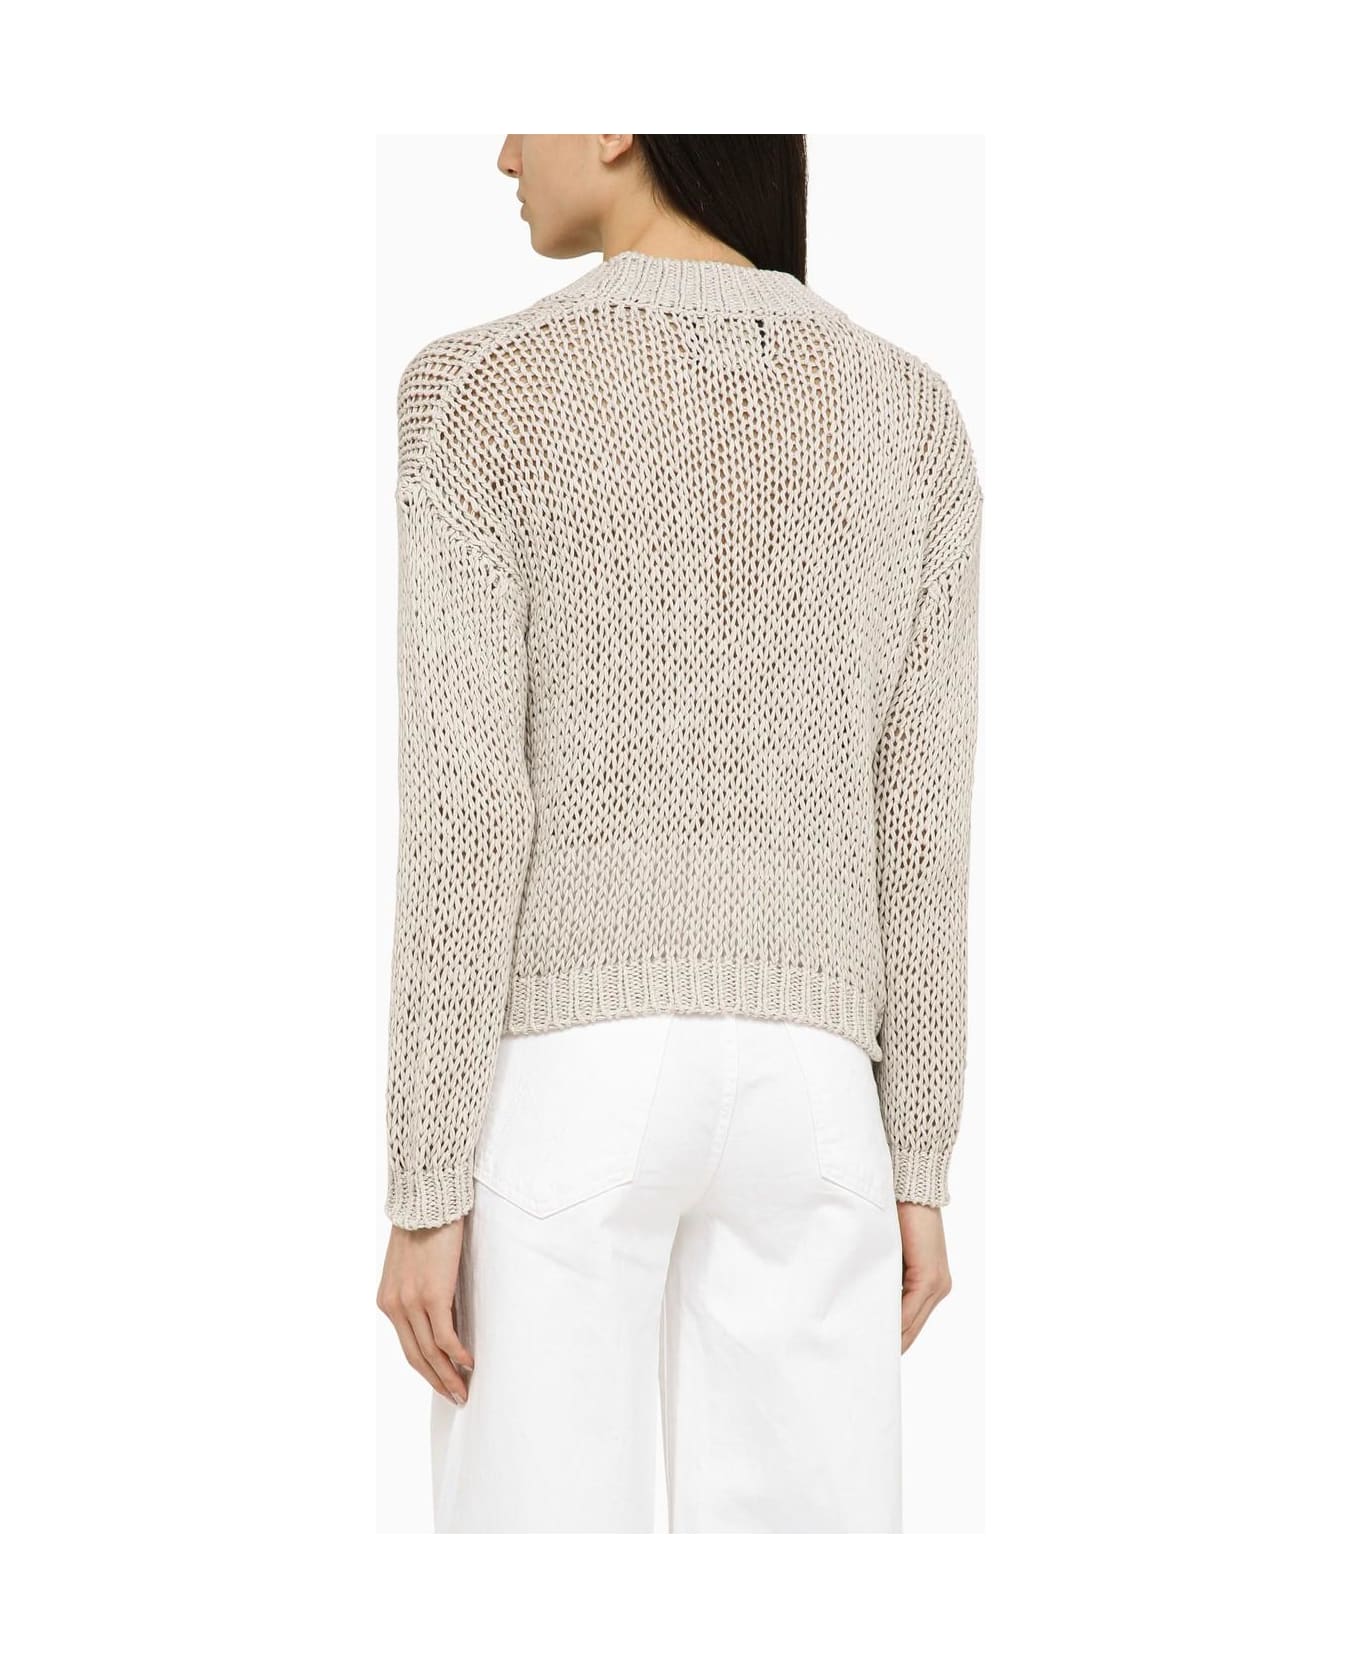 Roberto Collina Pearl-coloured Knitted Cardigan In Cotton Blend - Grey カーディガン